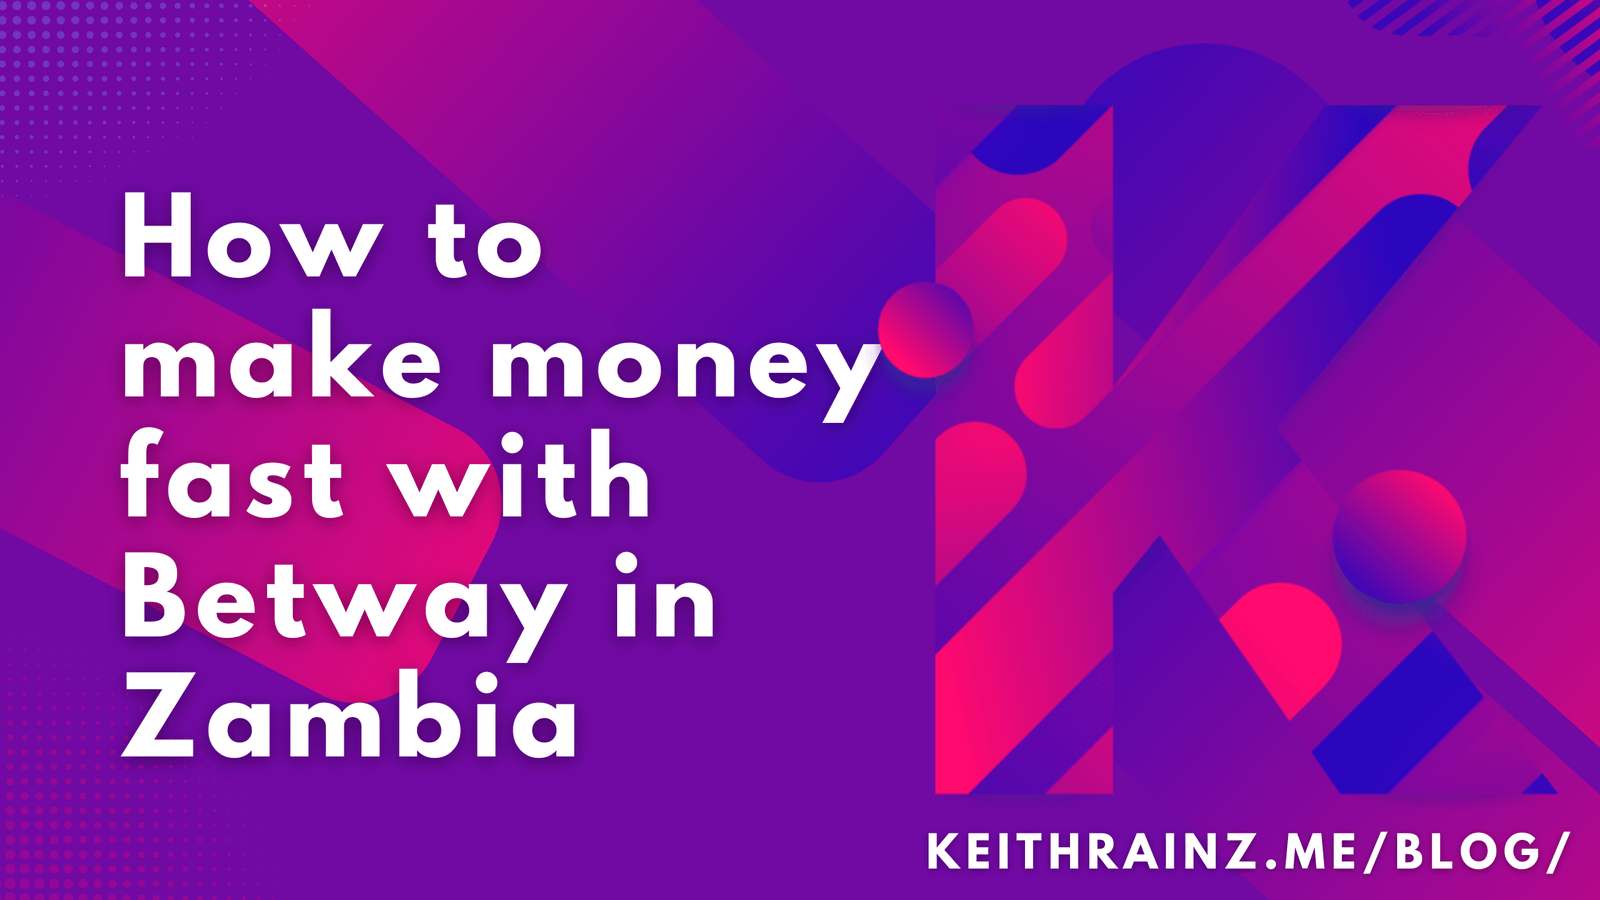 How to make money fast with Betway in Zambia